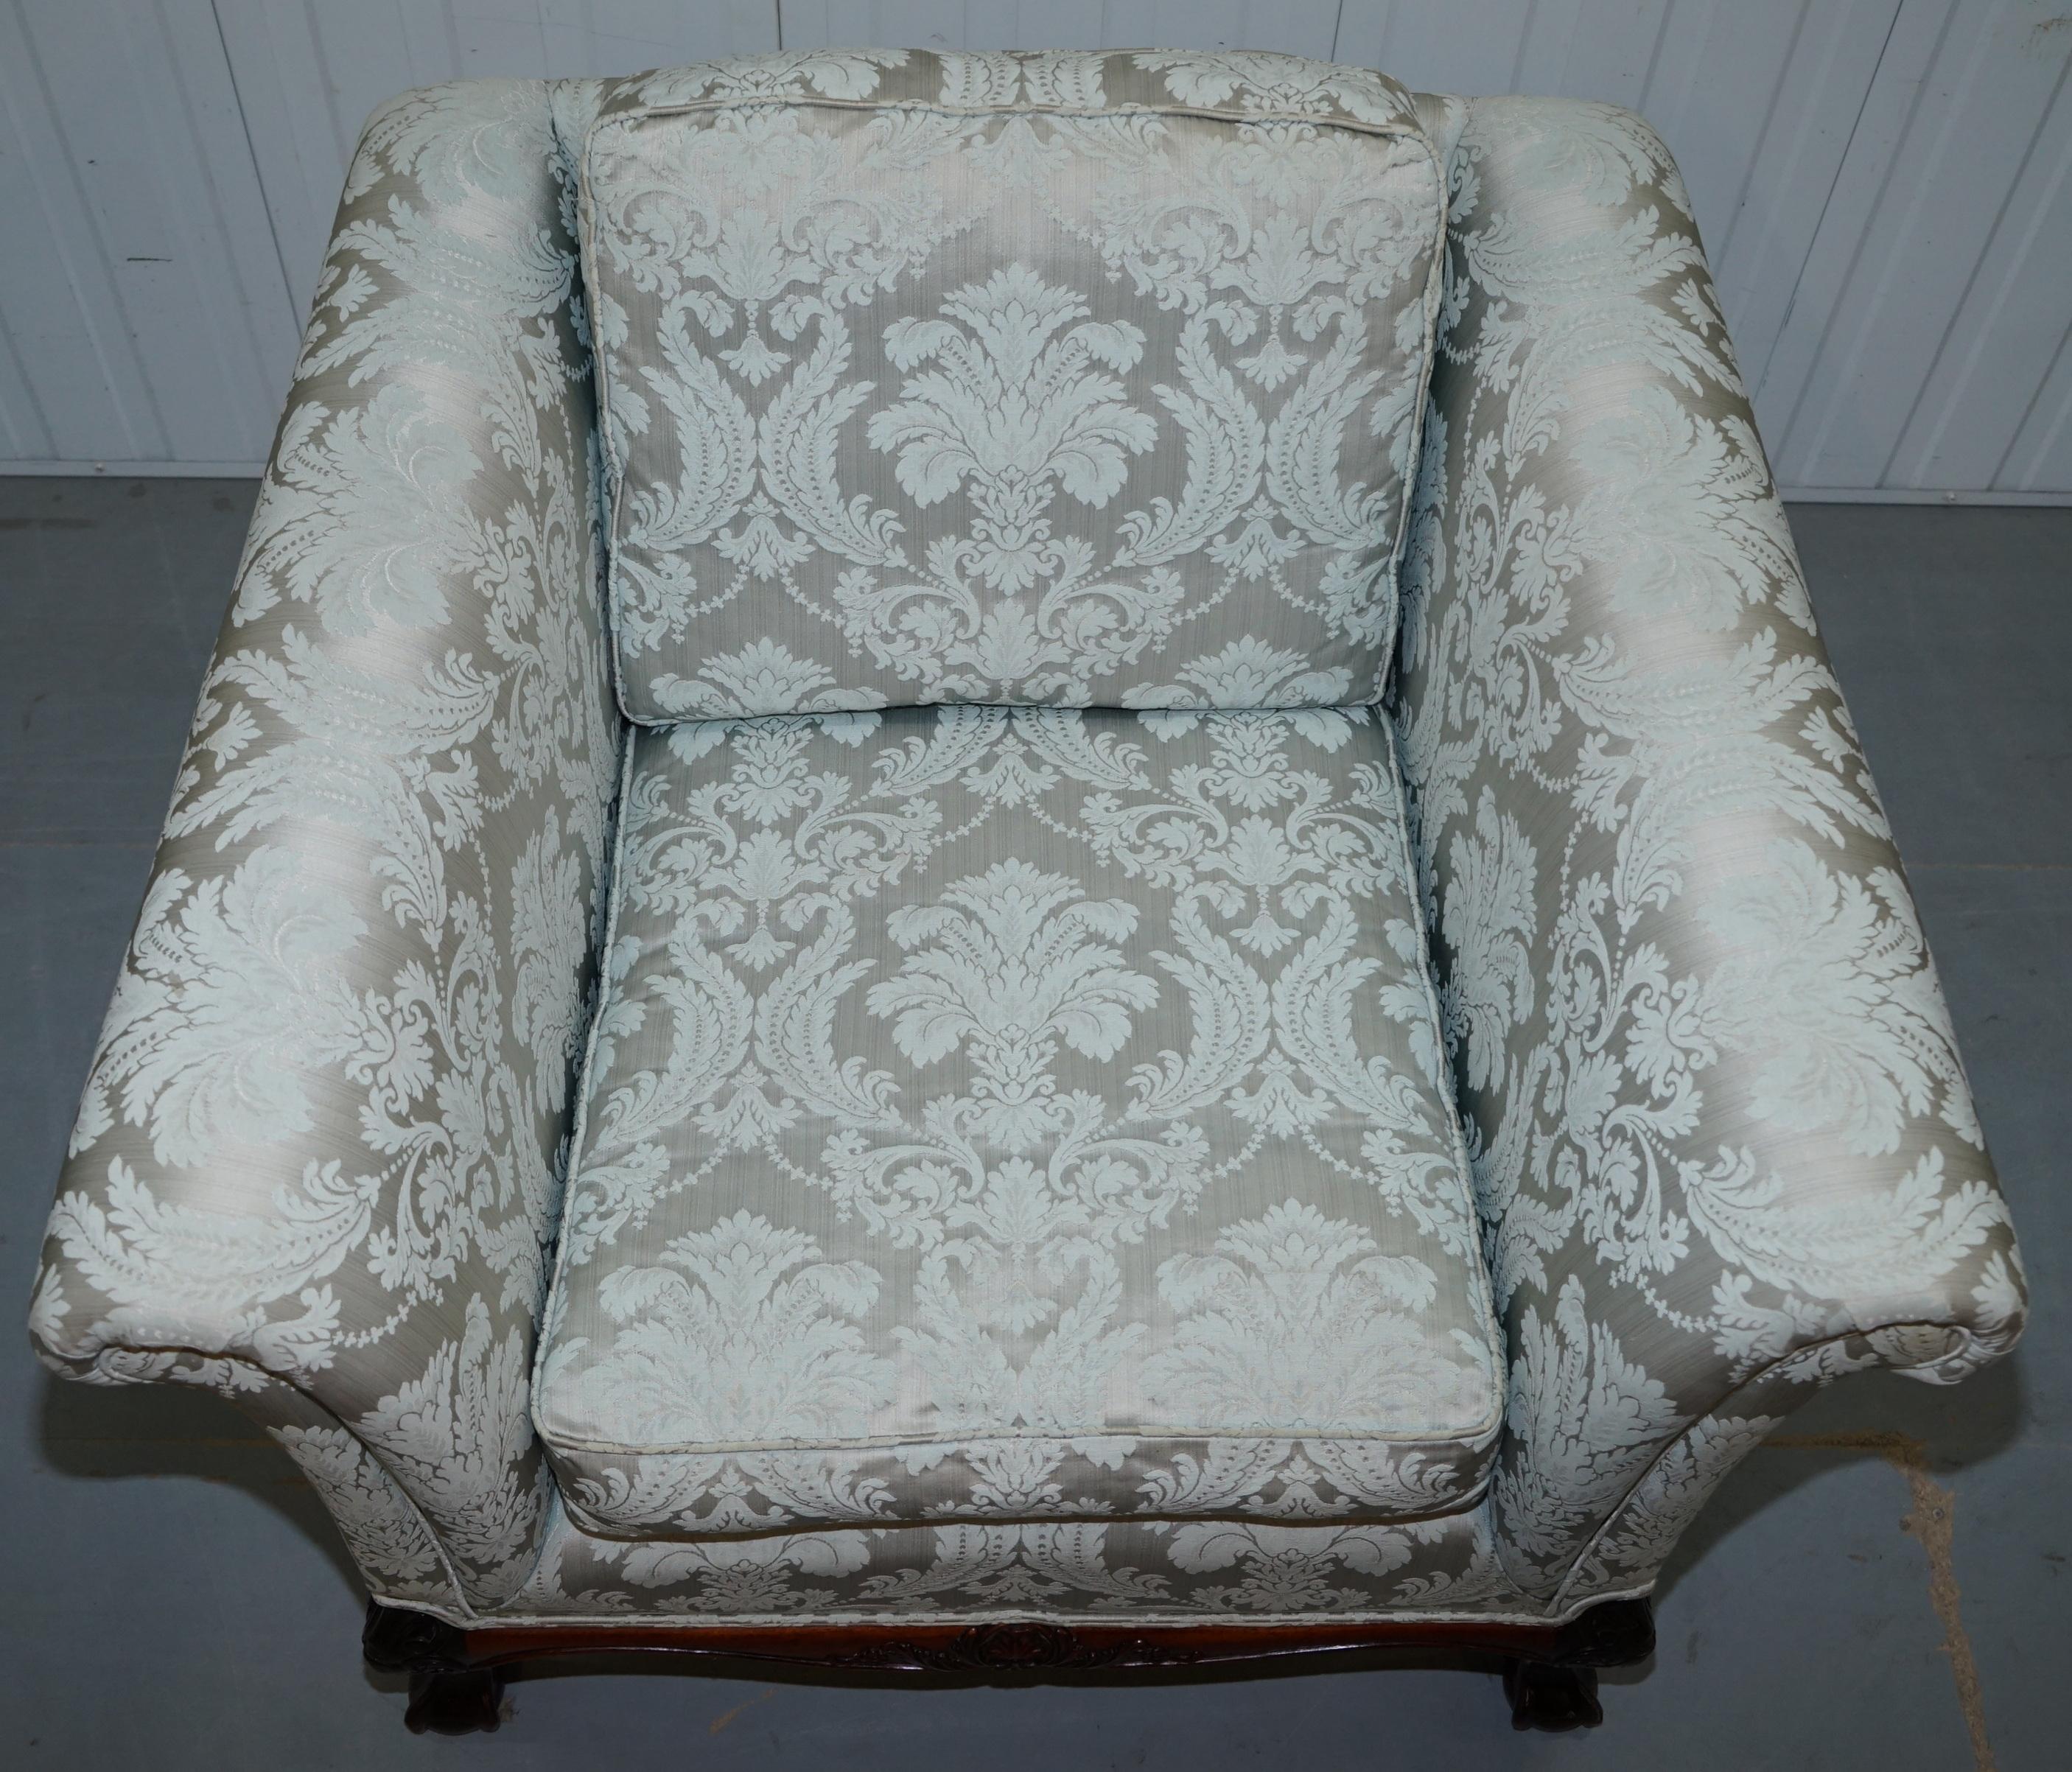 Lovely Brights of Nettlebed Three Piece Sofa & Armchair Suite Damask Upholstery 11